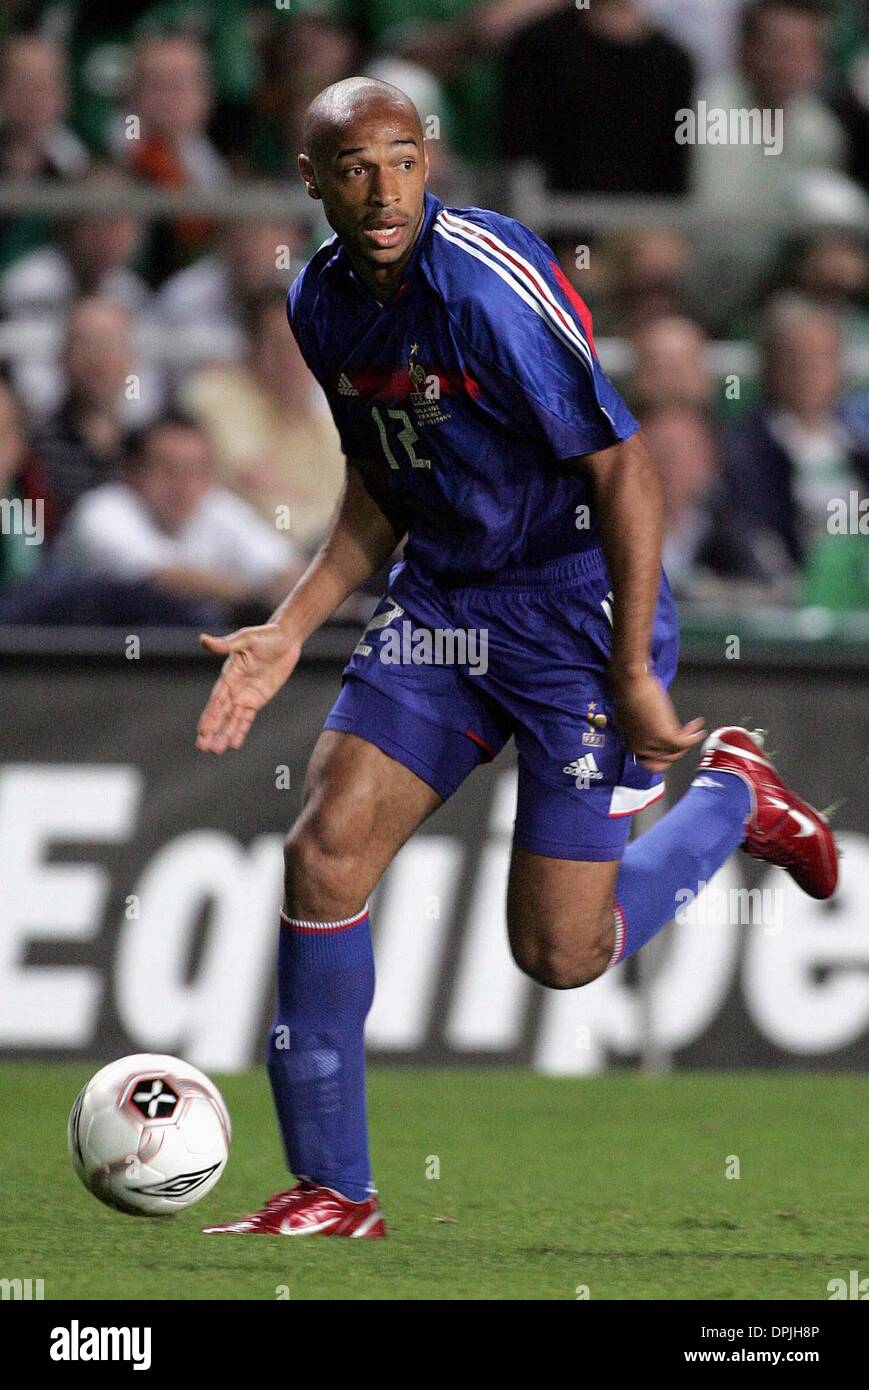 THIERRY HENRY.FRANCE & ARSENAL FC.REP OF IRELAND V FRANCE.LANSDOWNE ROAD,DUBLIN.07/09/2005.DIJ36939.K47872.WORLD CUP PREVIEW 2006 Stock Photo